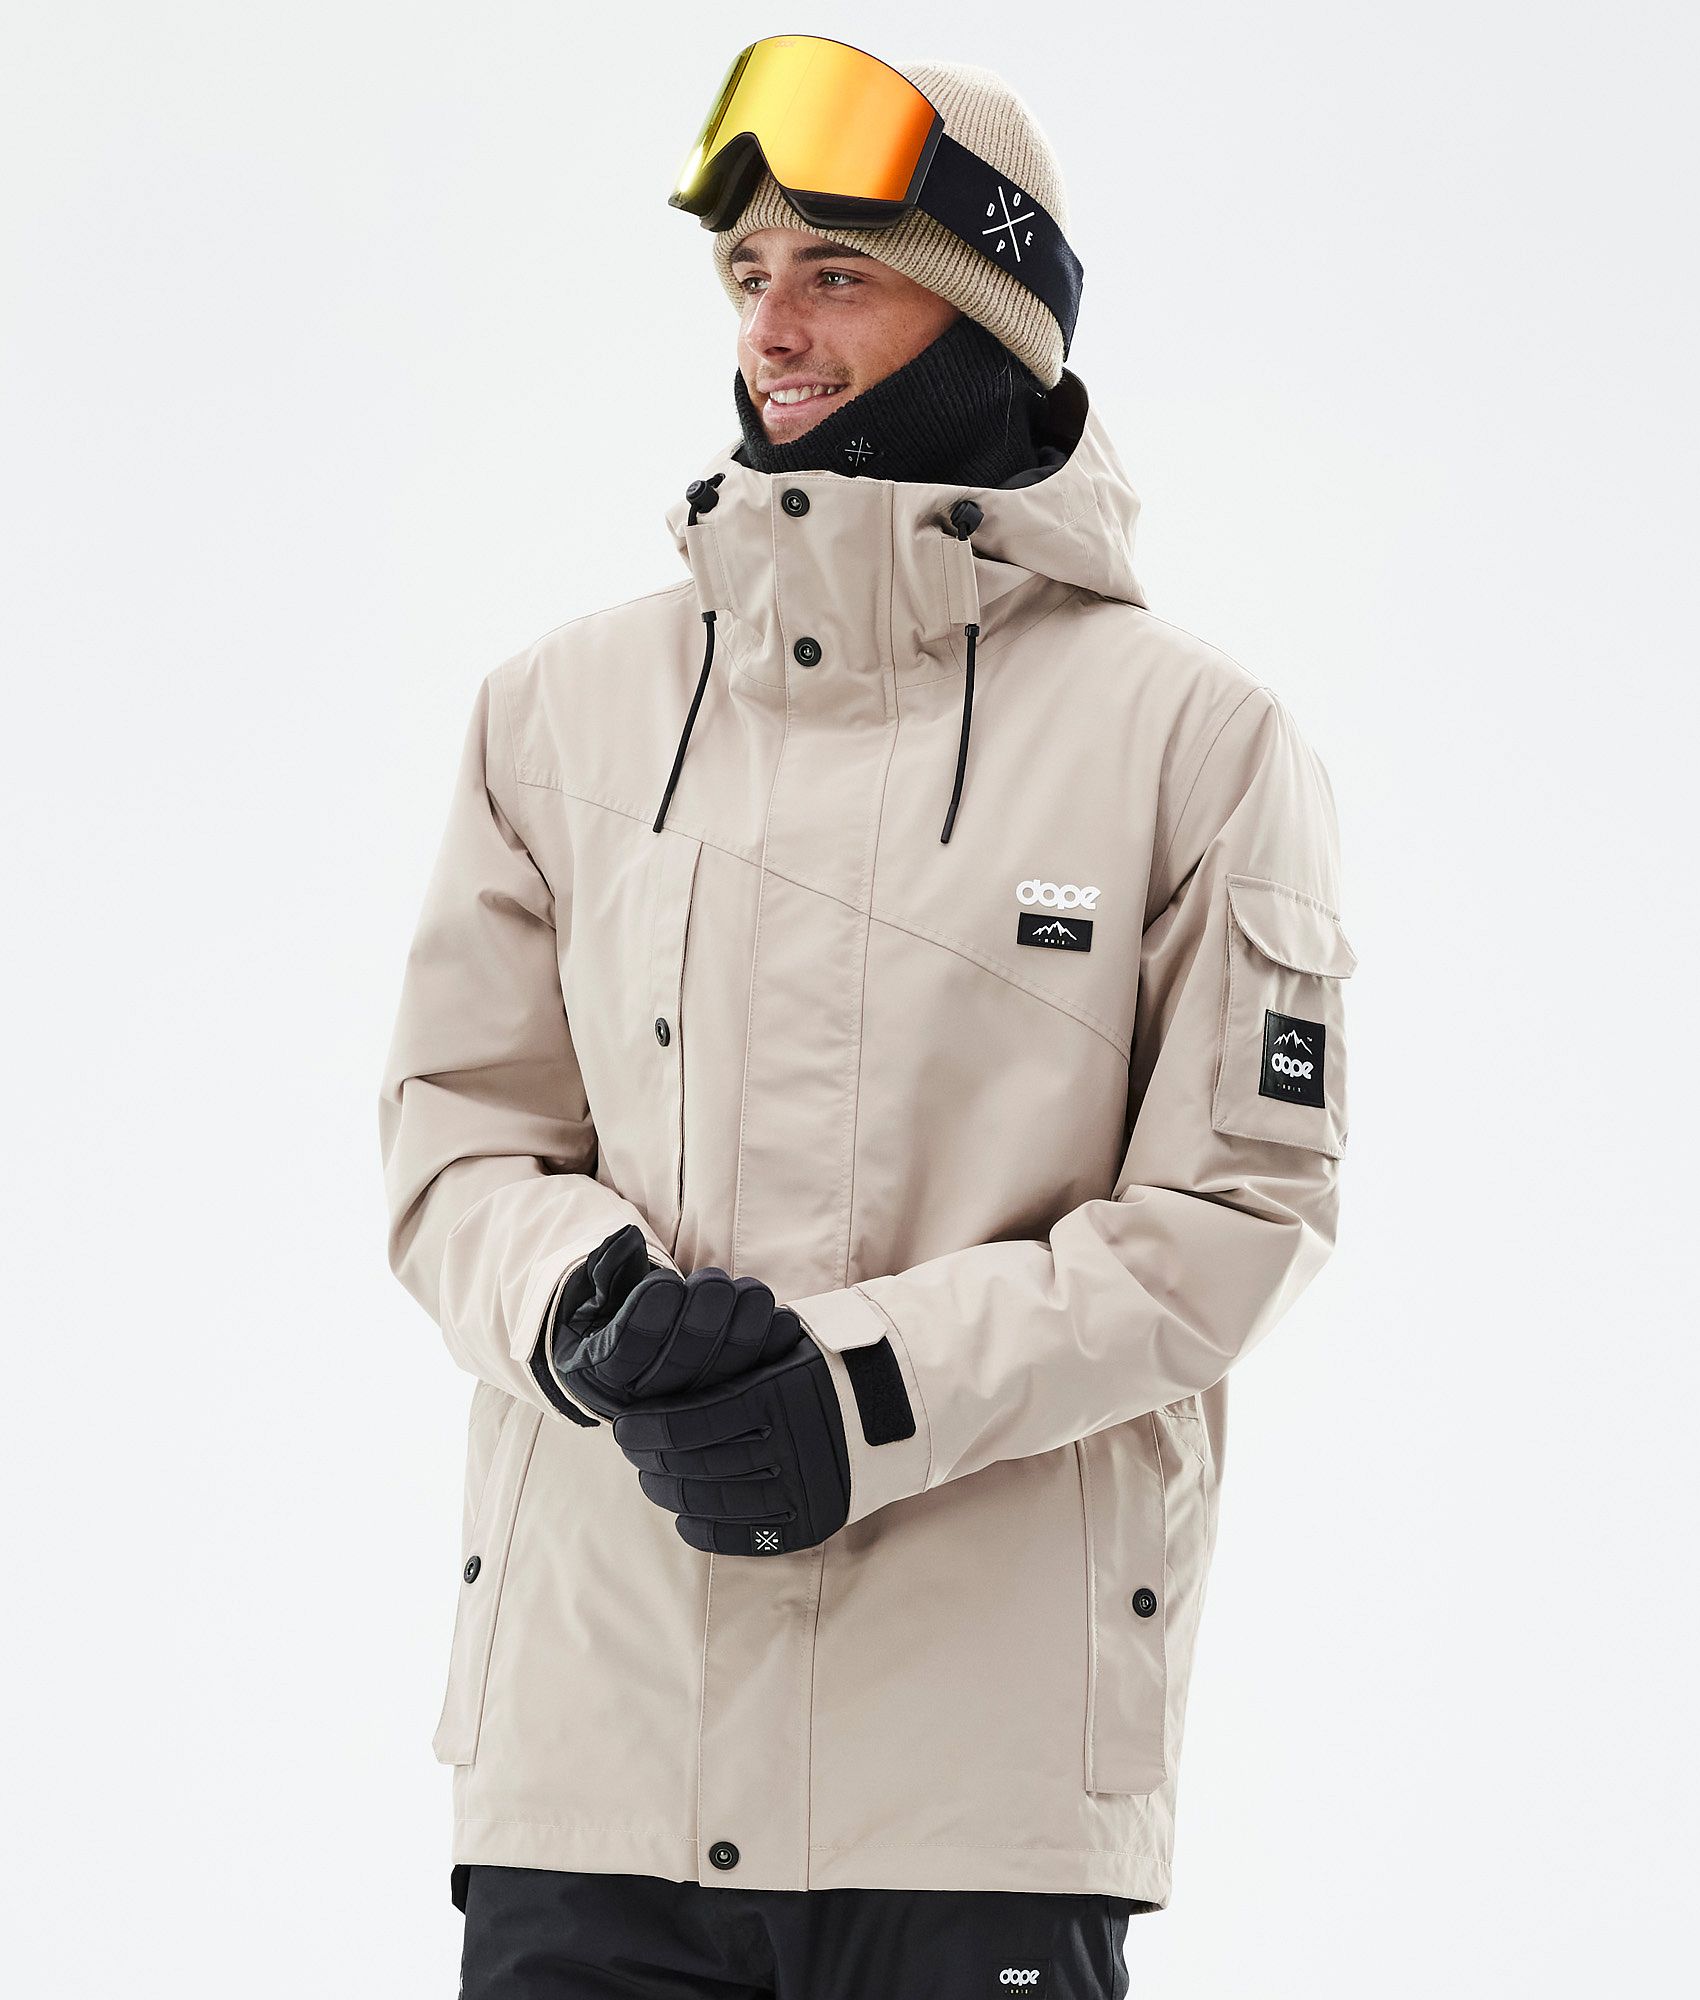 Mens Snowboard Clothing Fast and Free Delivery RIDESTORE